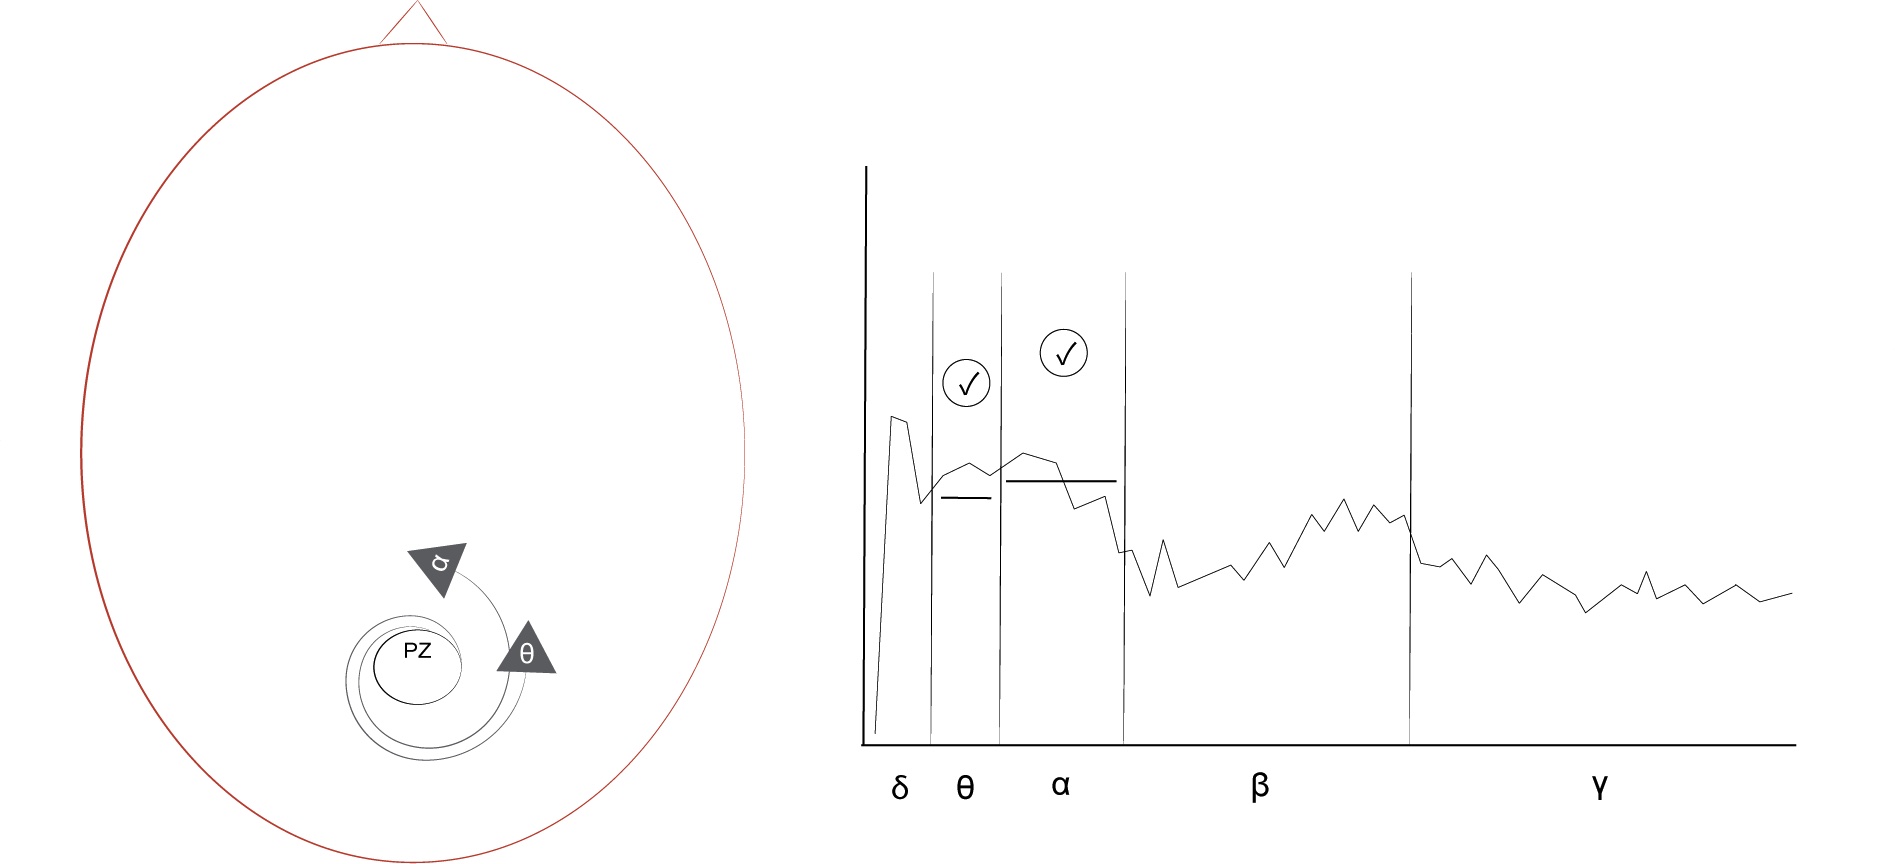 A deep protocol's electrode location (left) and spectral plot (right) show the application of two indicators, one on theta and one on alpha.